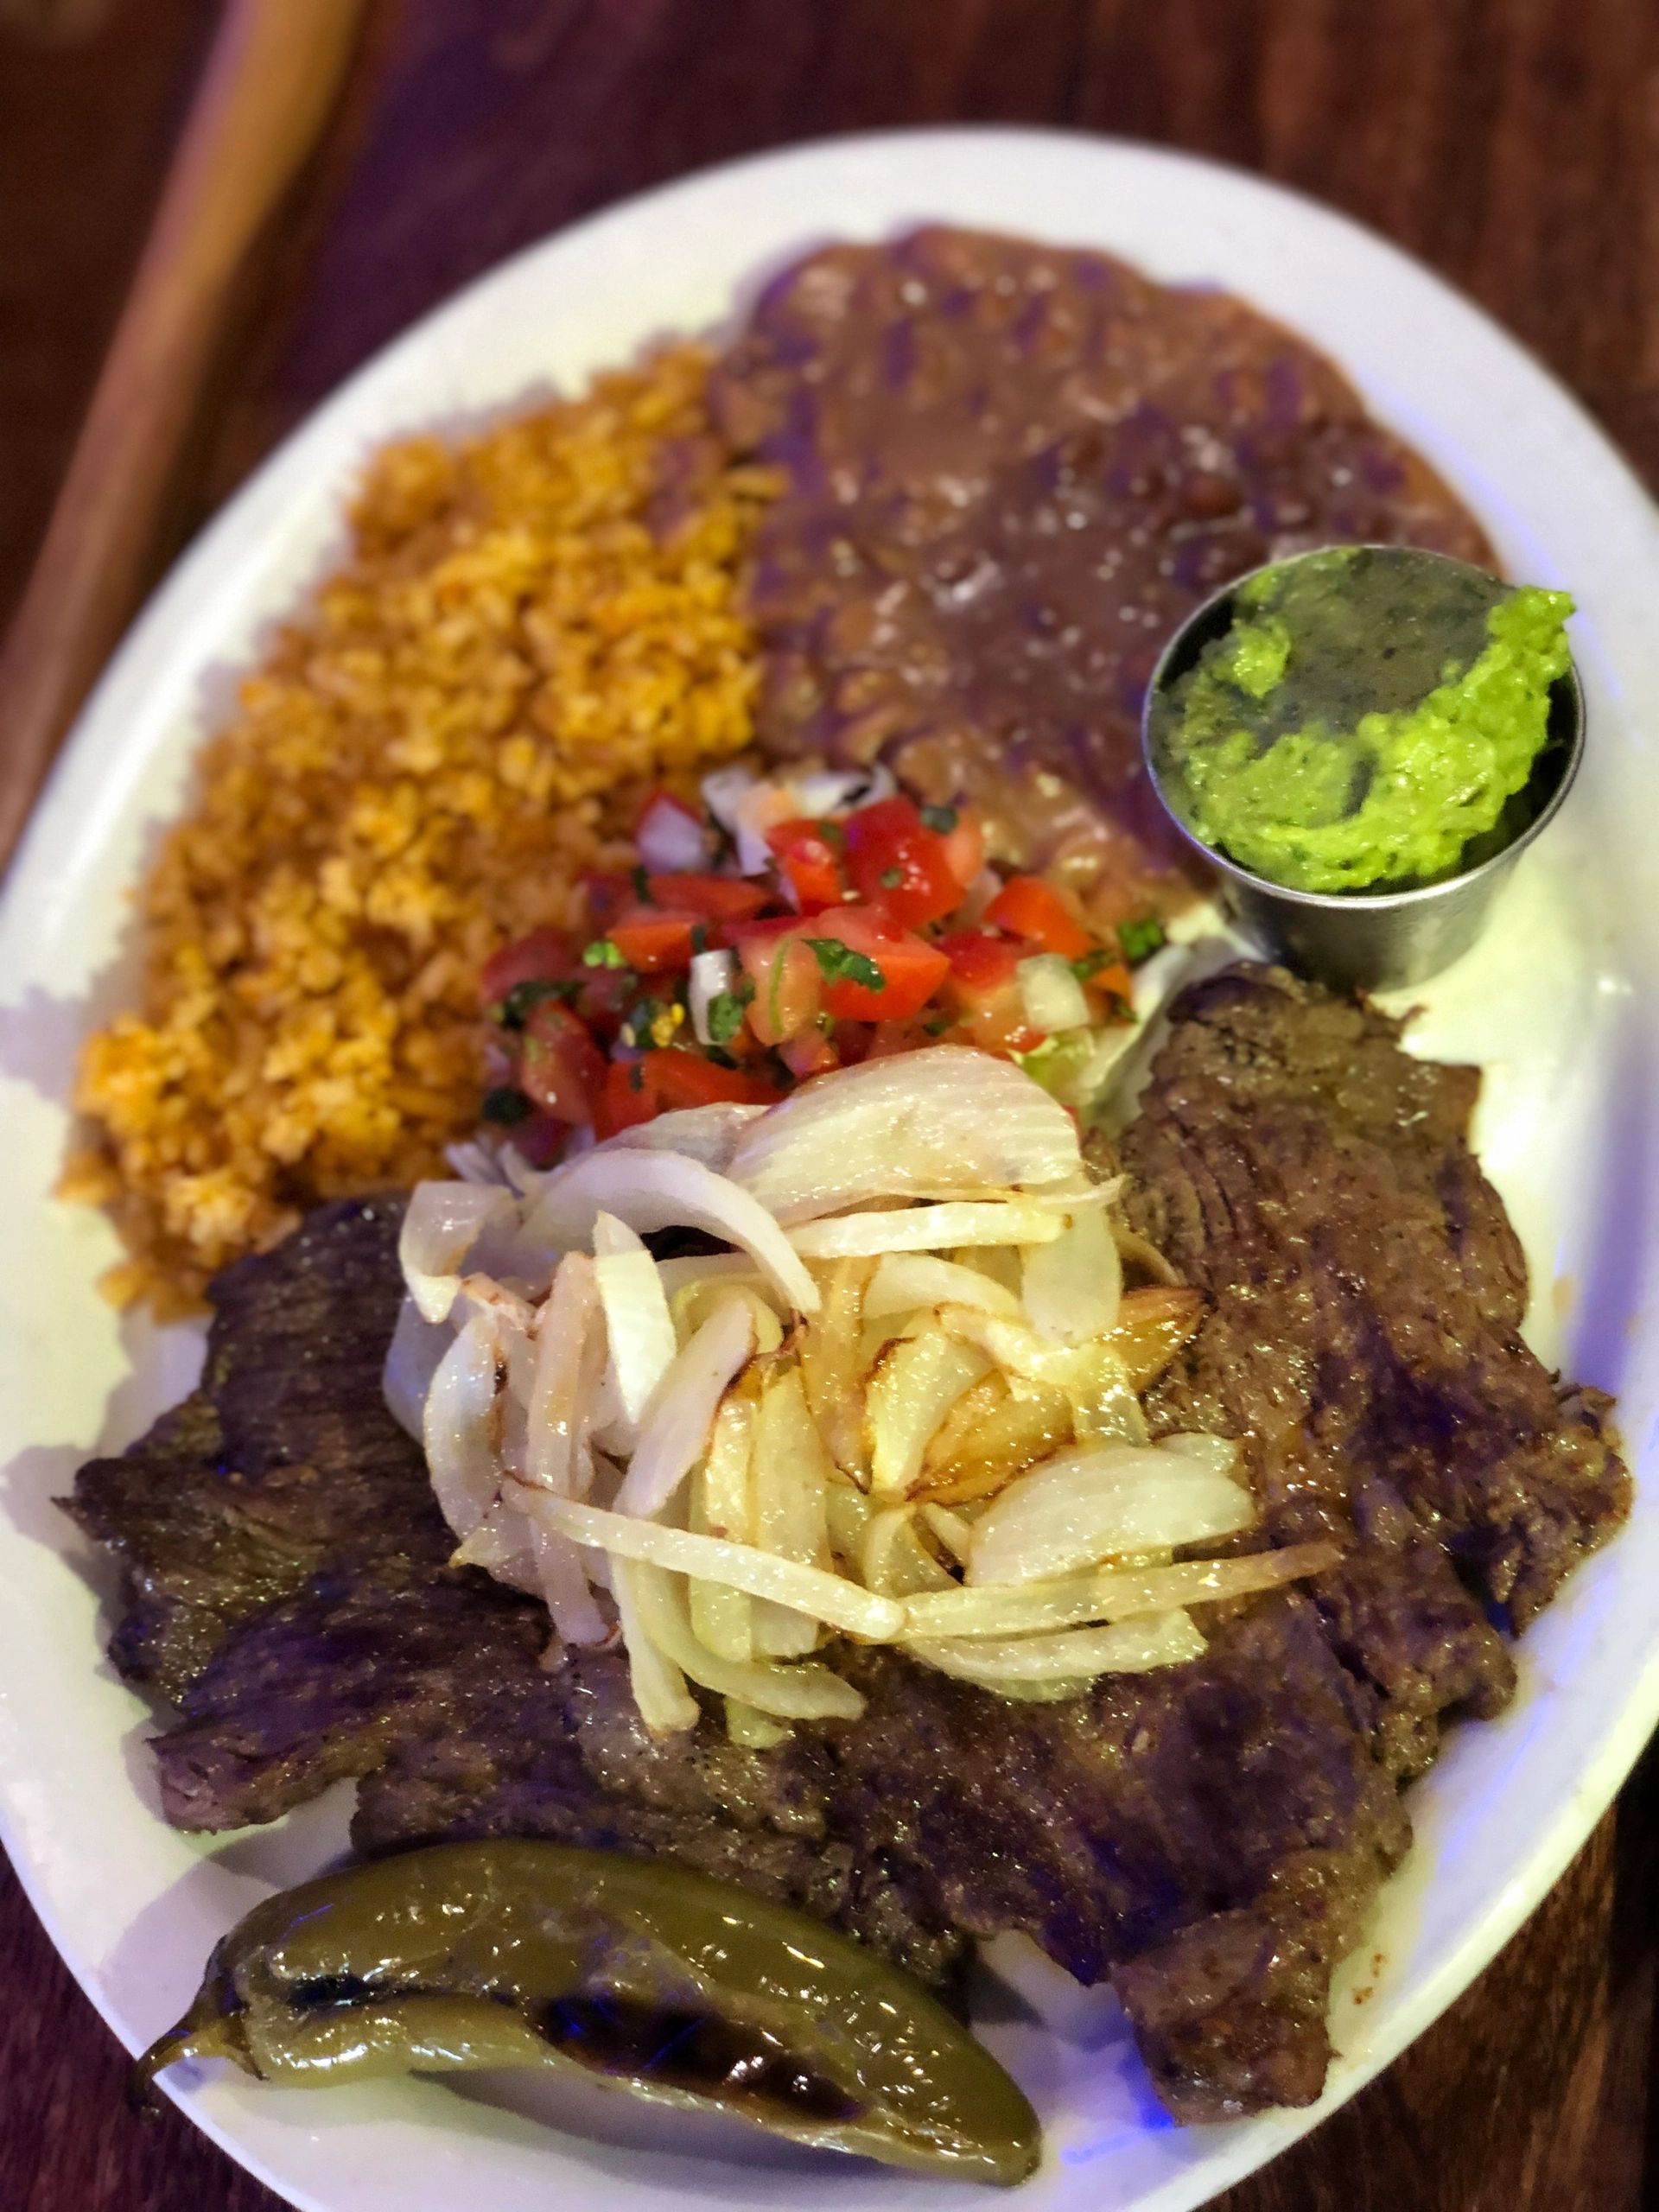 Carne Asada - Seasoned grilled flank steak, served with grilled jalapeno & onion, rice, beans and ho